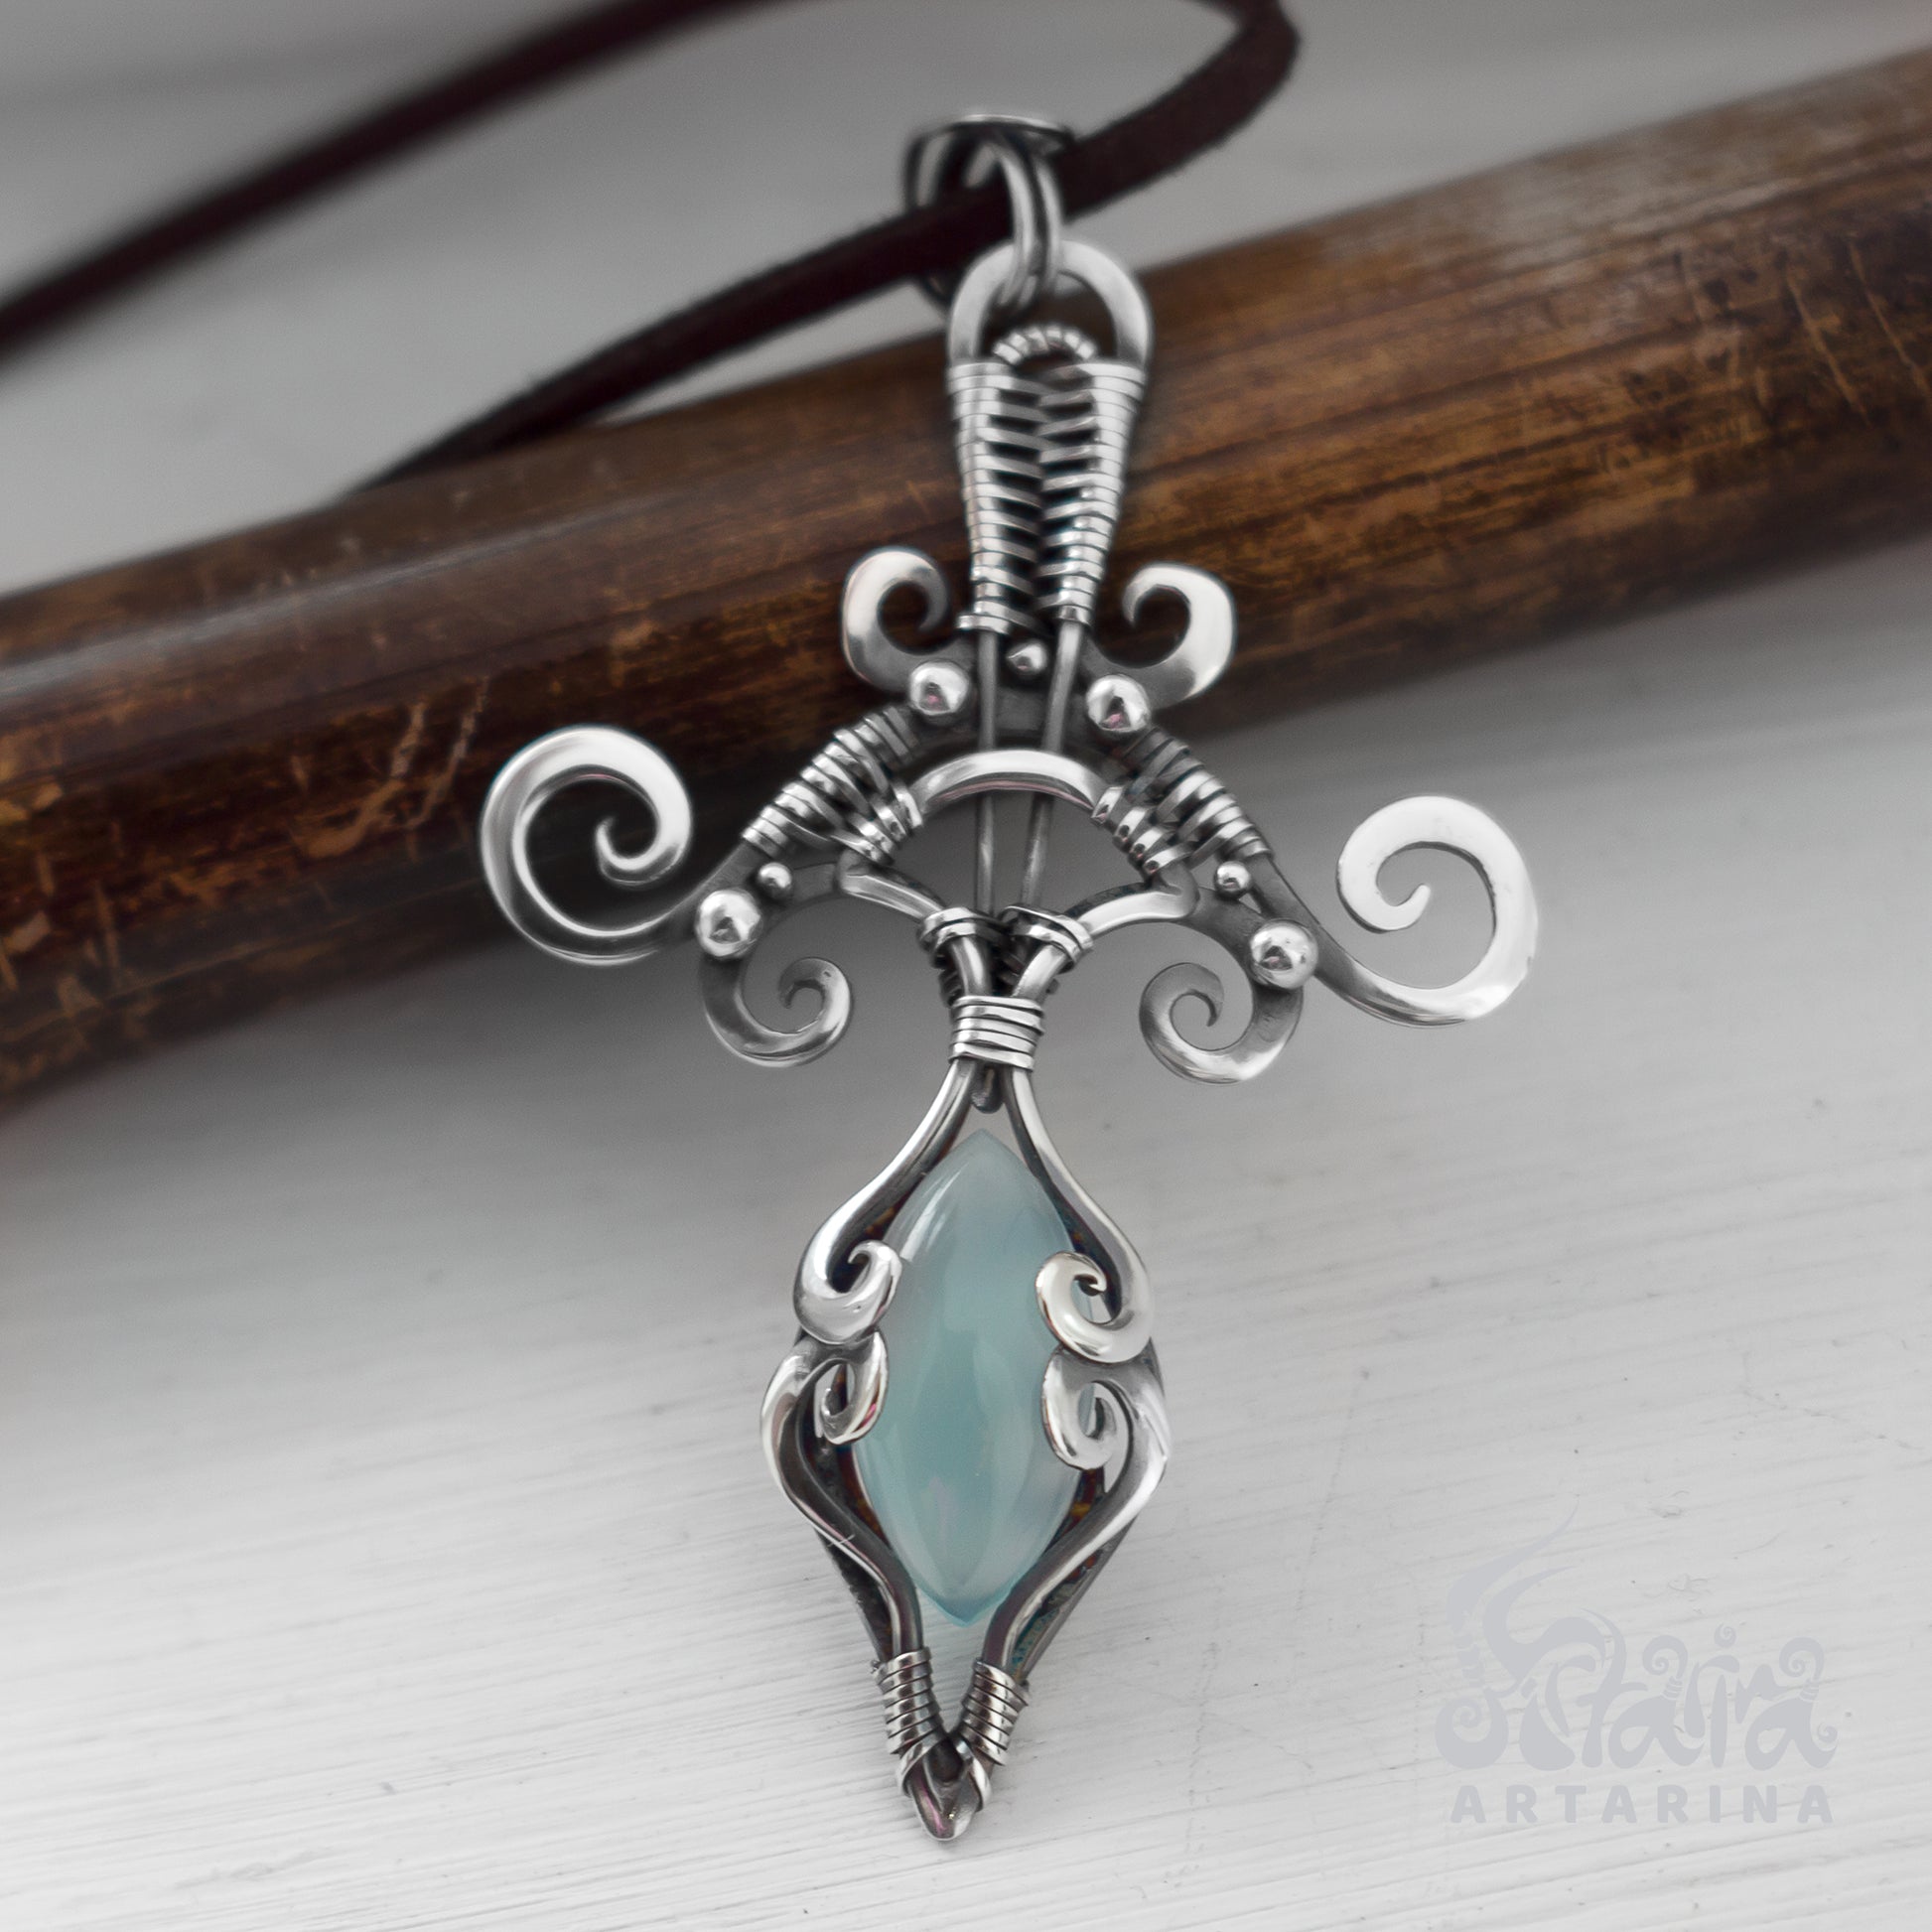 Fantasy elven silver necklace with blue chalcedony gemstone pic 4